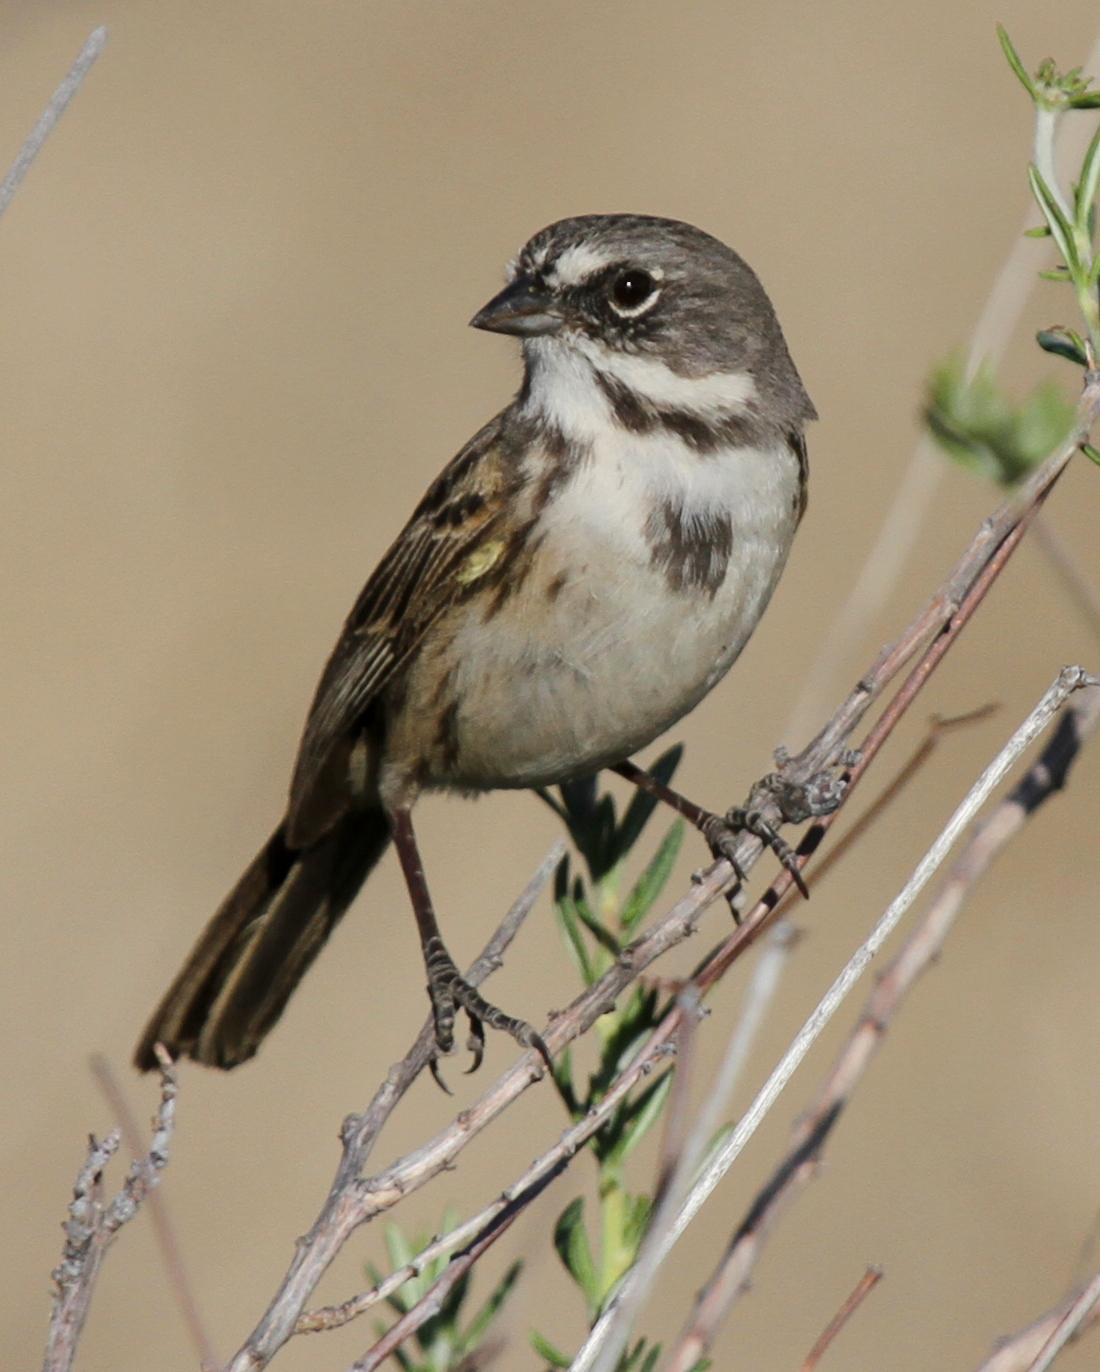 Bell's Sparrow Photo by Matthew Grube